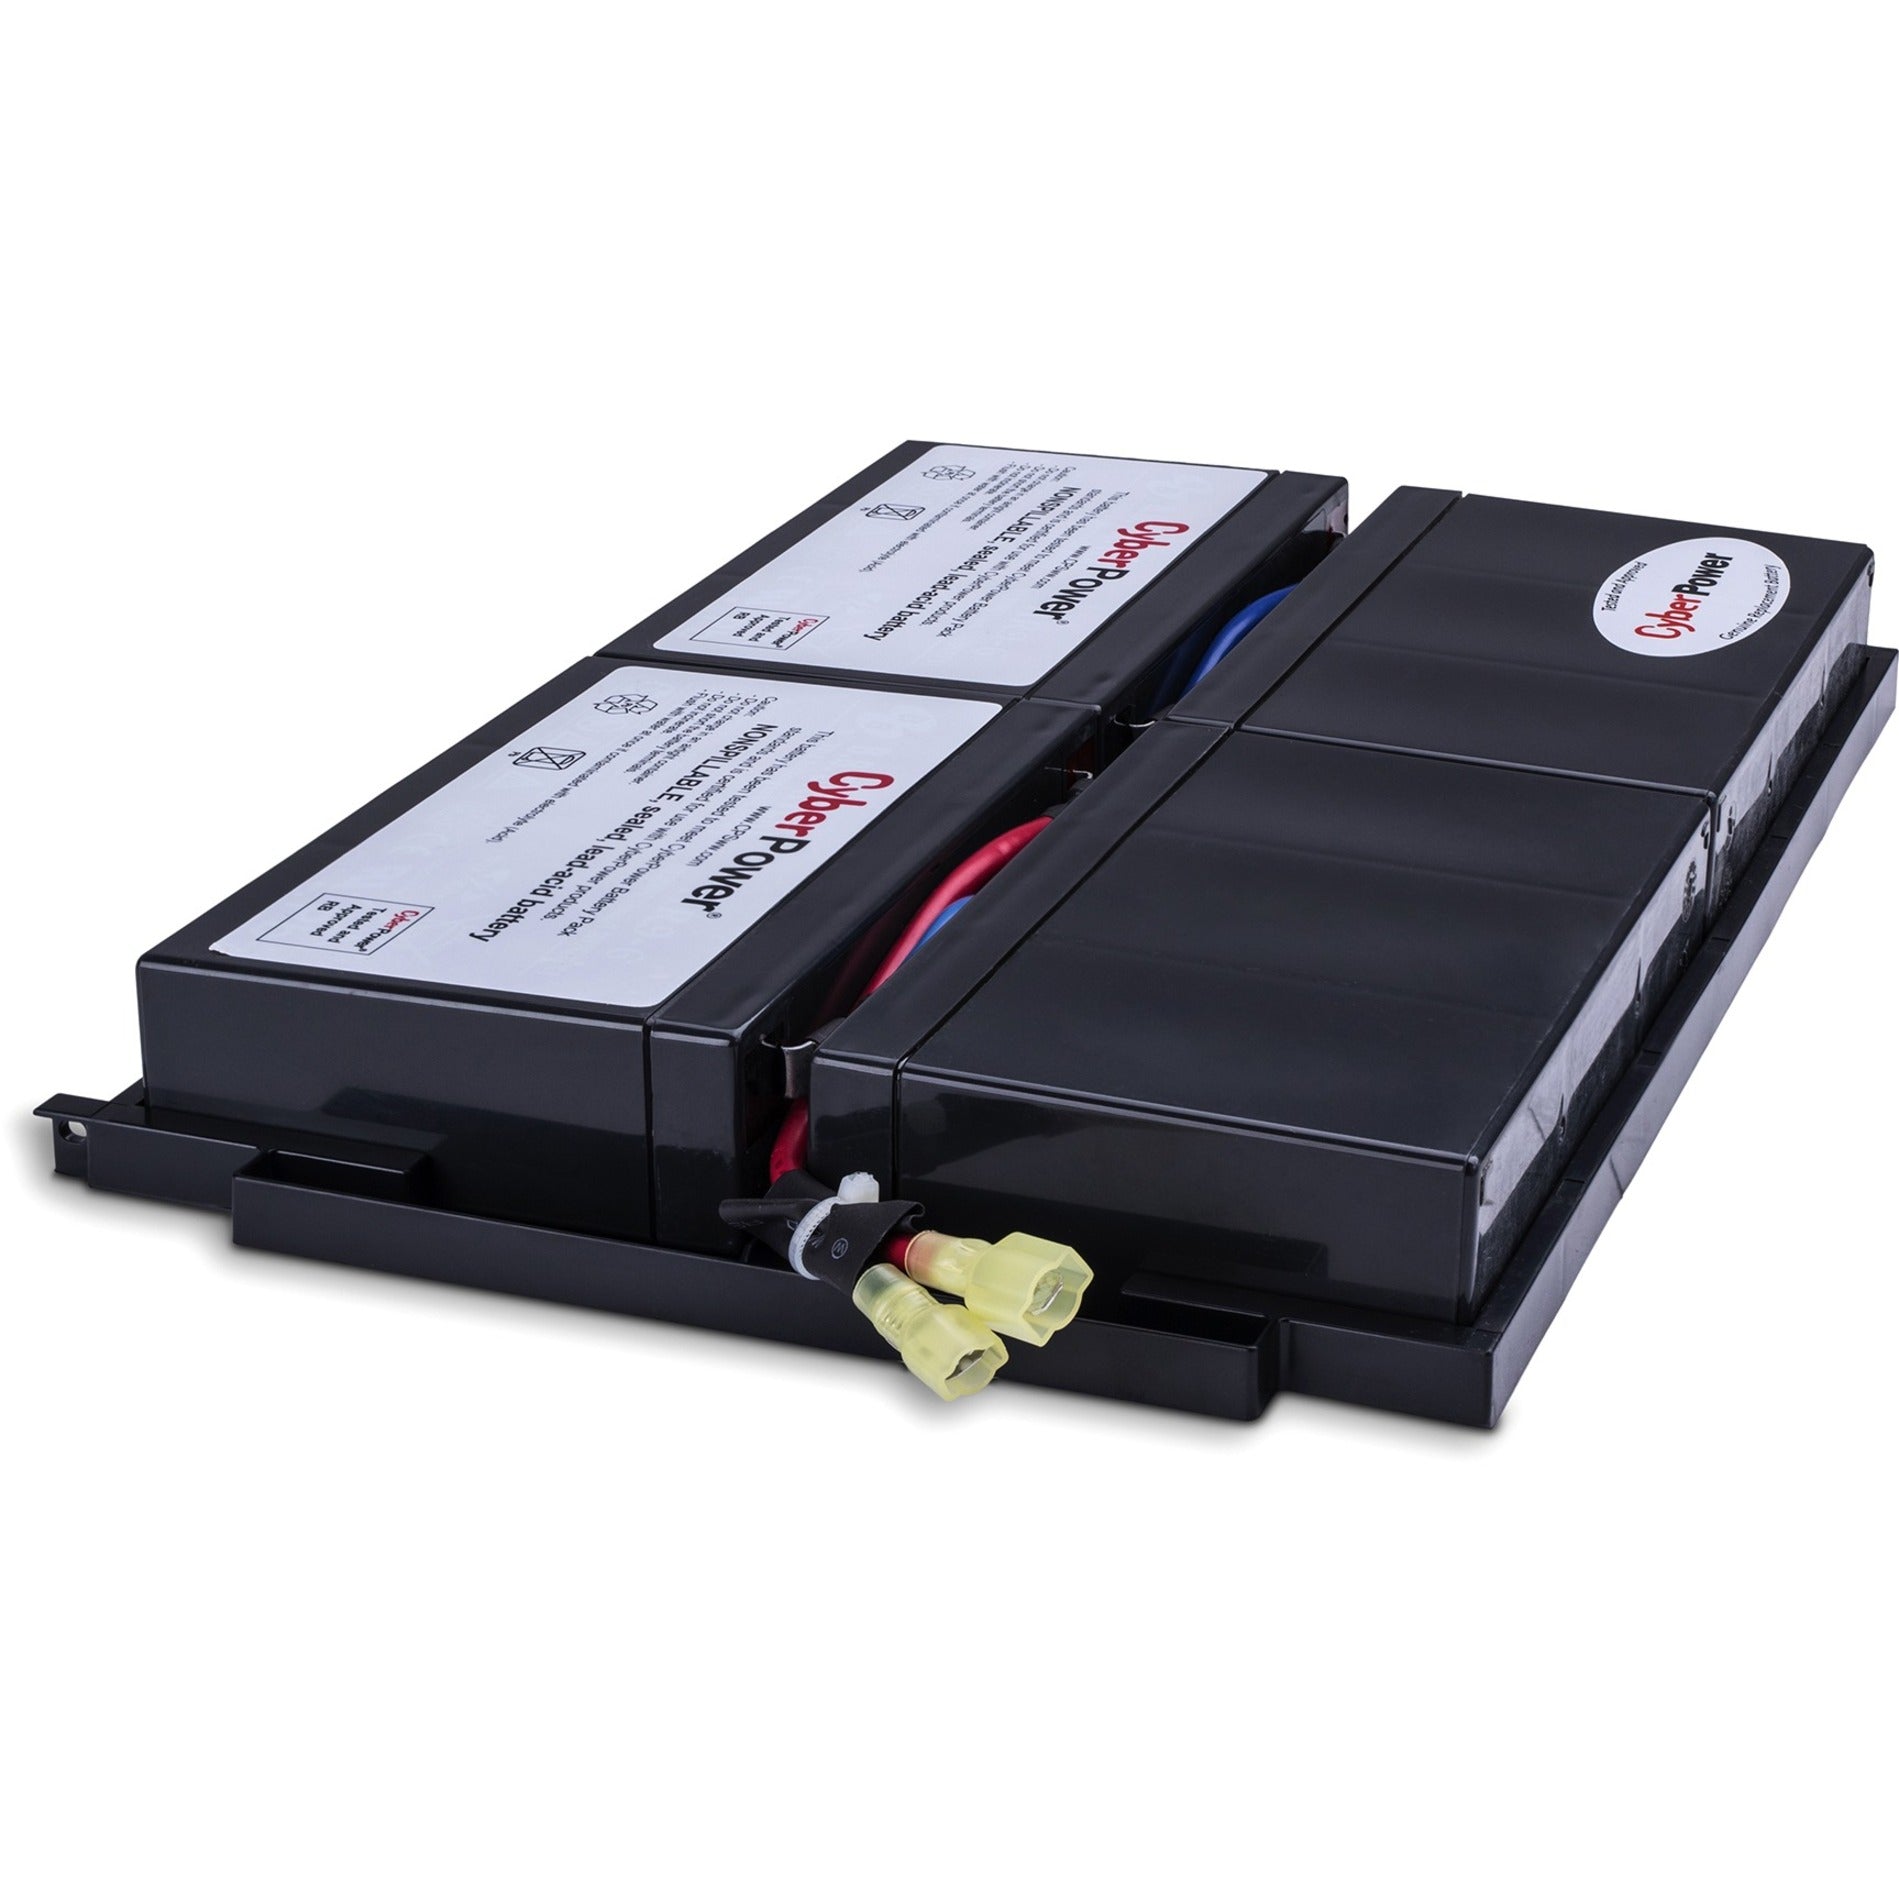 CyberPower RB0670X4 UPS Replacement Battery Cartridge, 6V DC, 7000mAh, Lead Acid, Maintenance-free